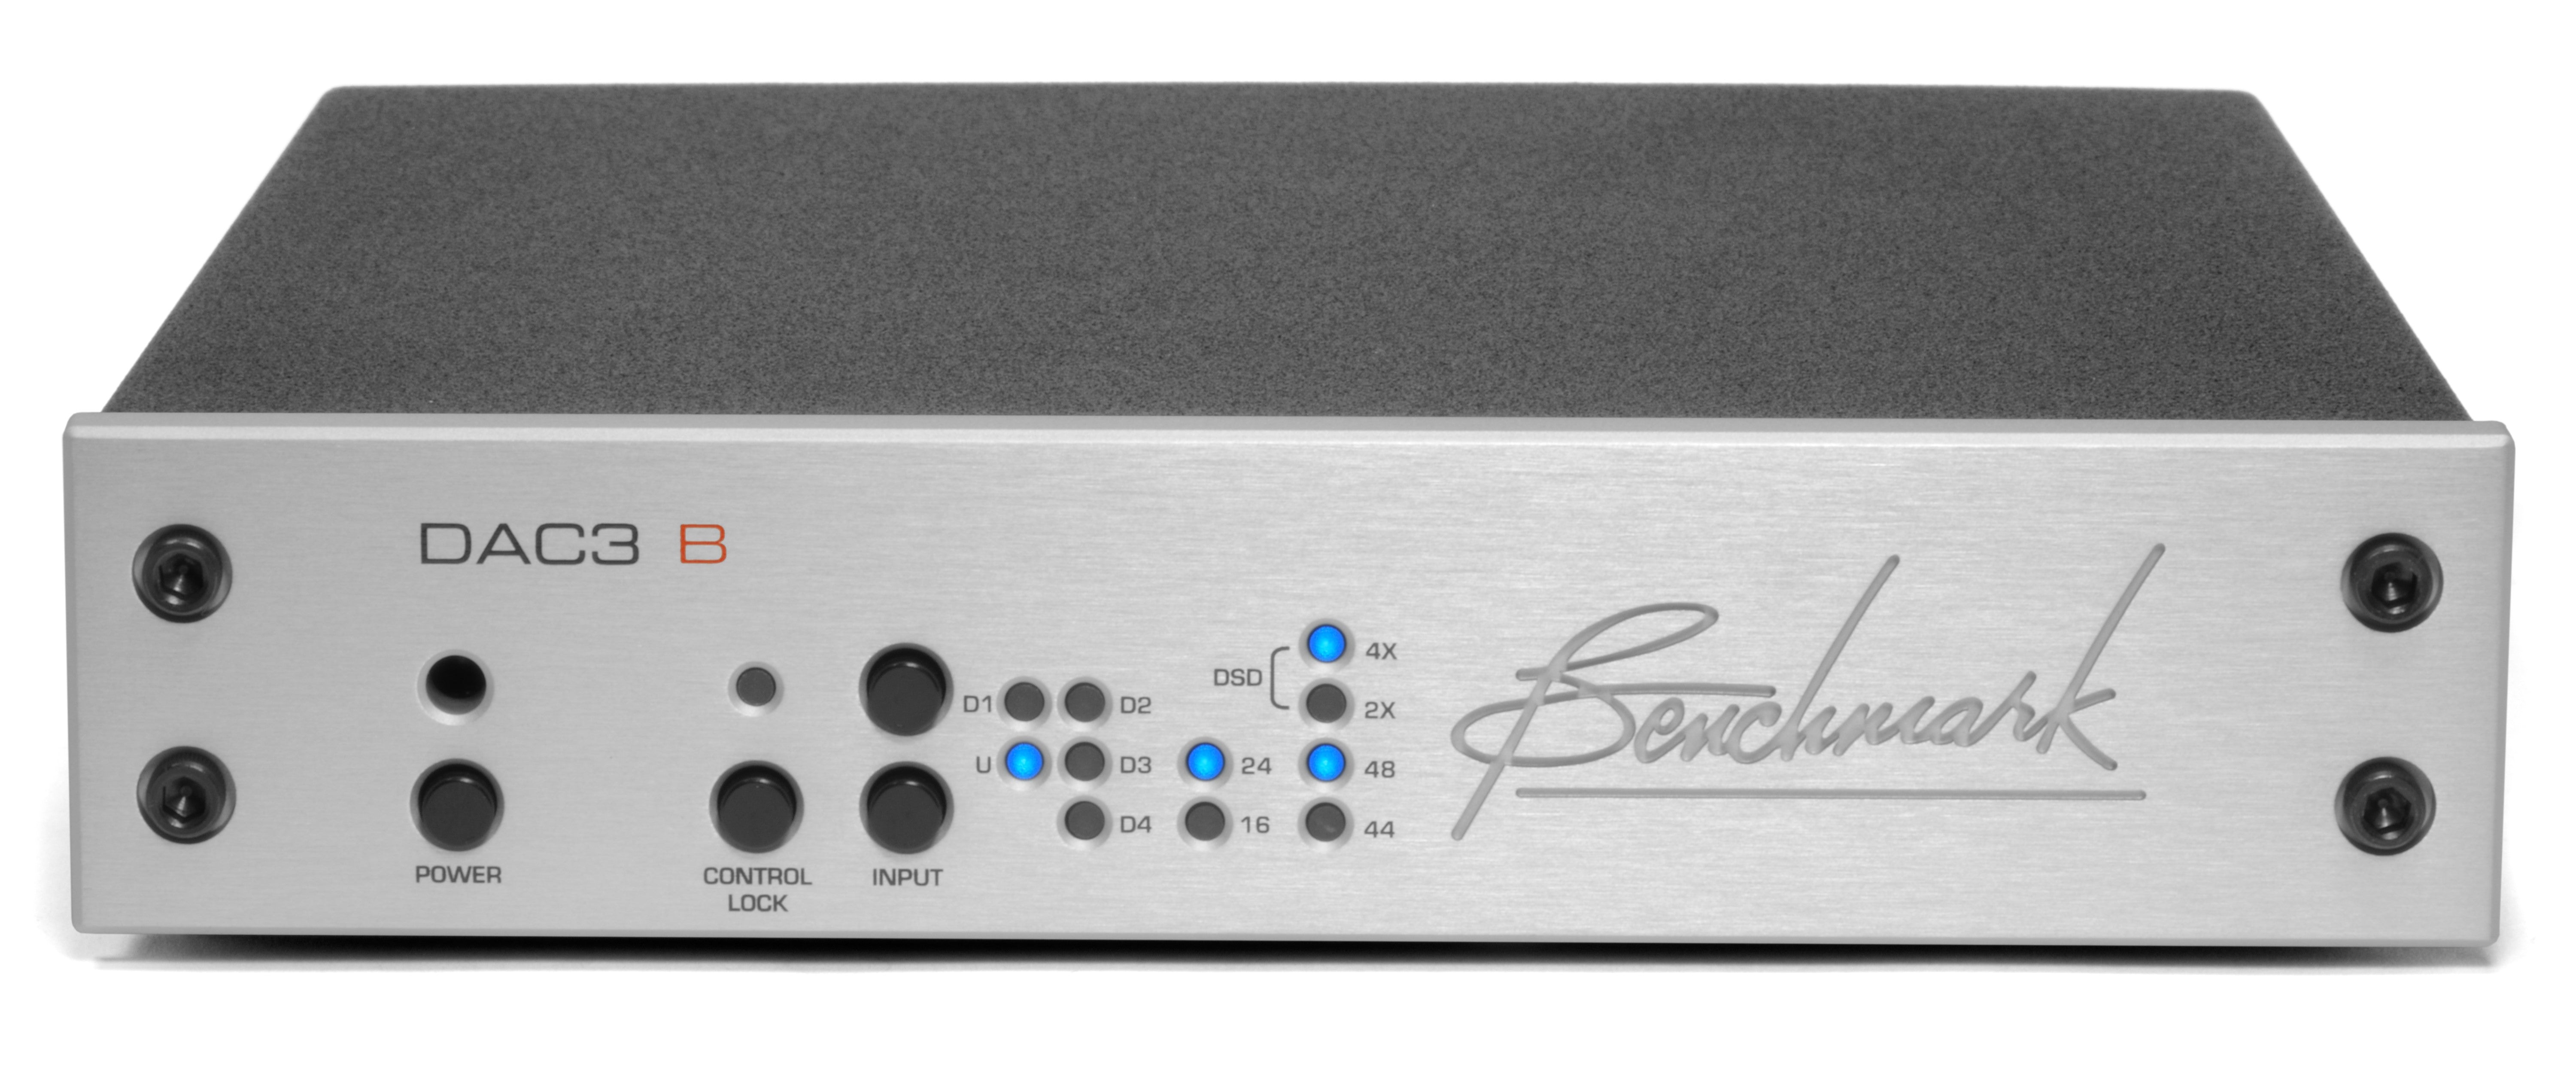 Benchmark DAC3 B with Silver Faceplate